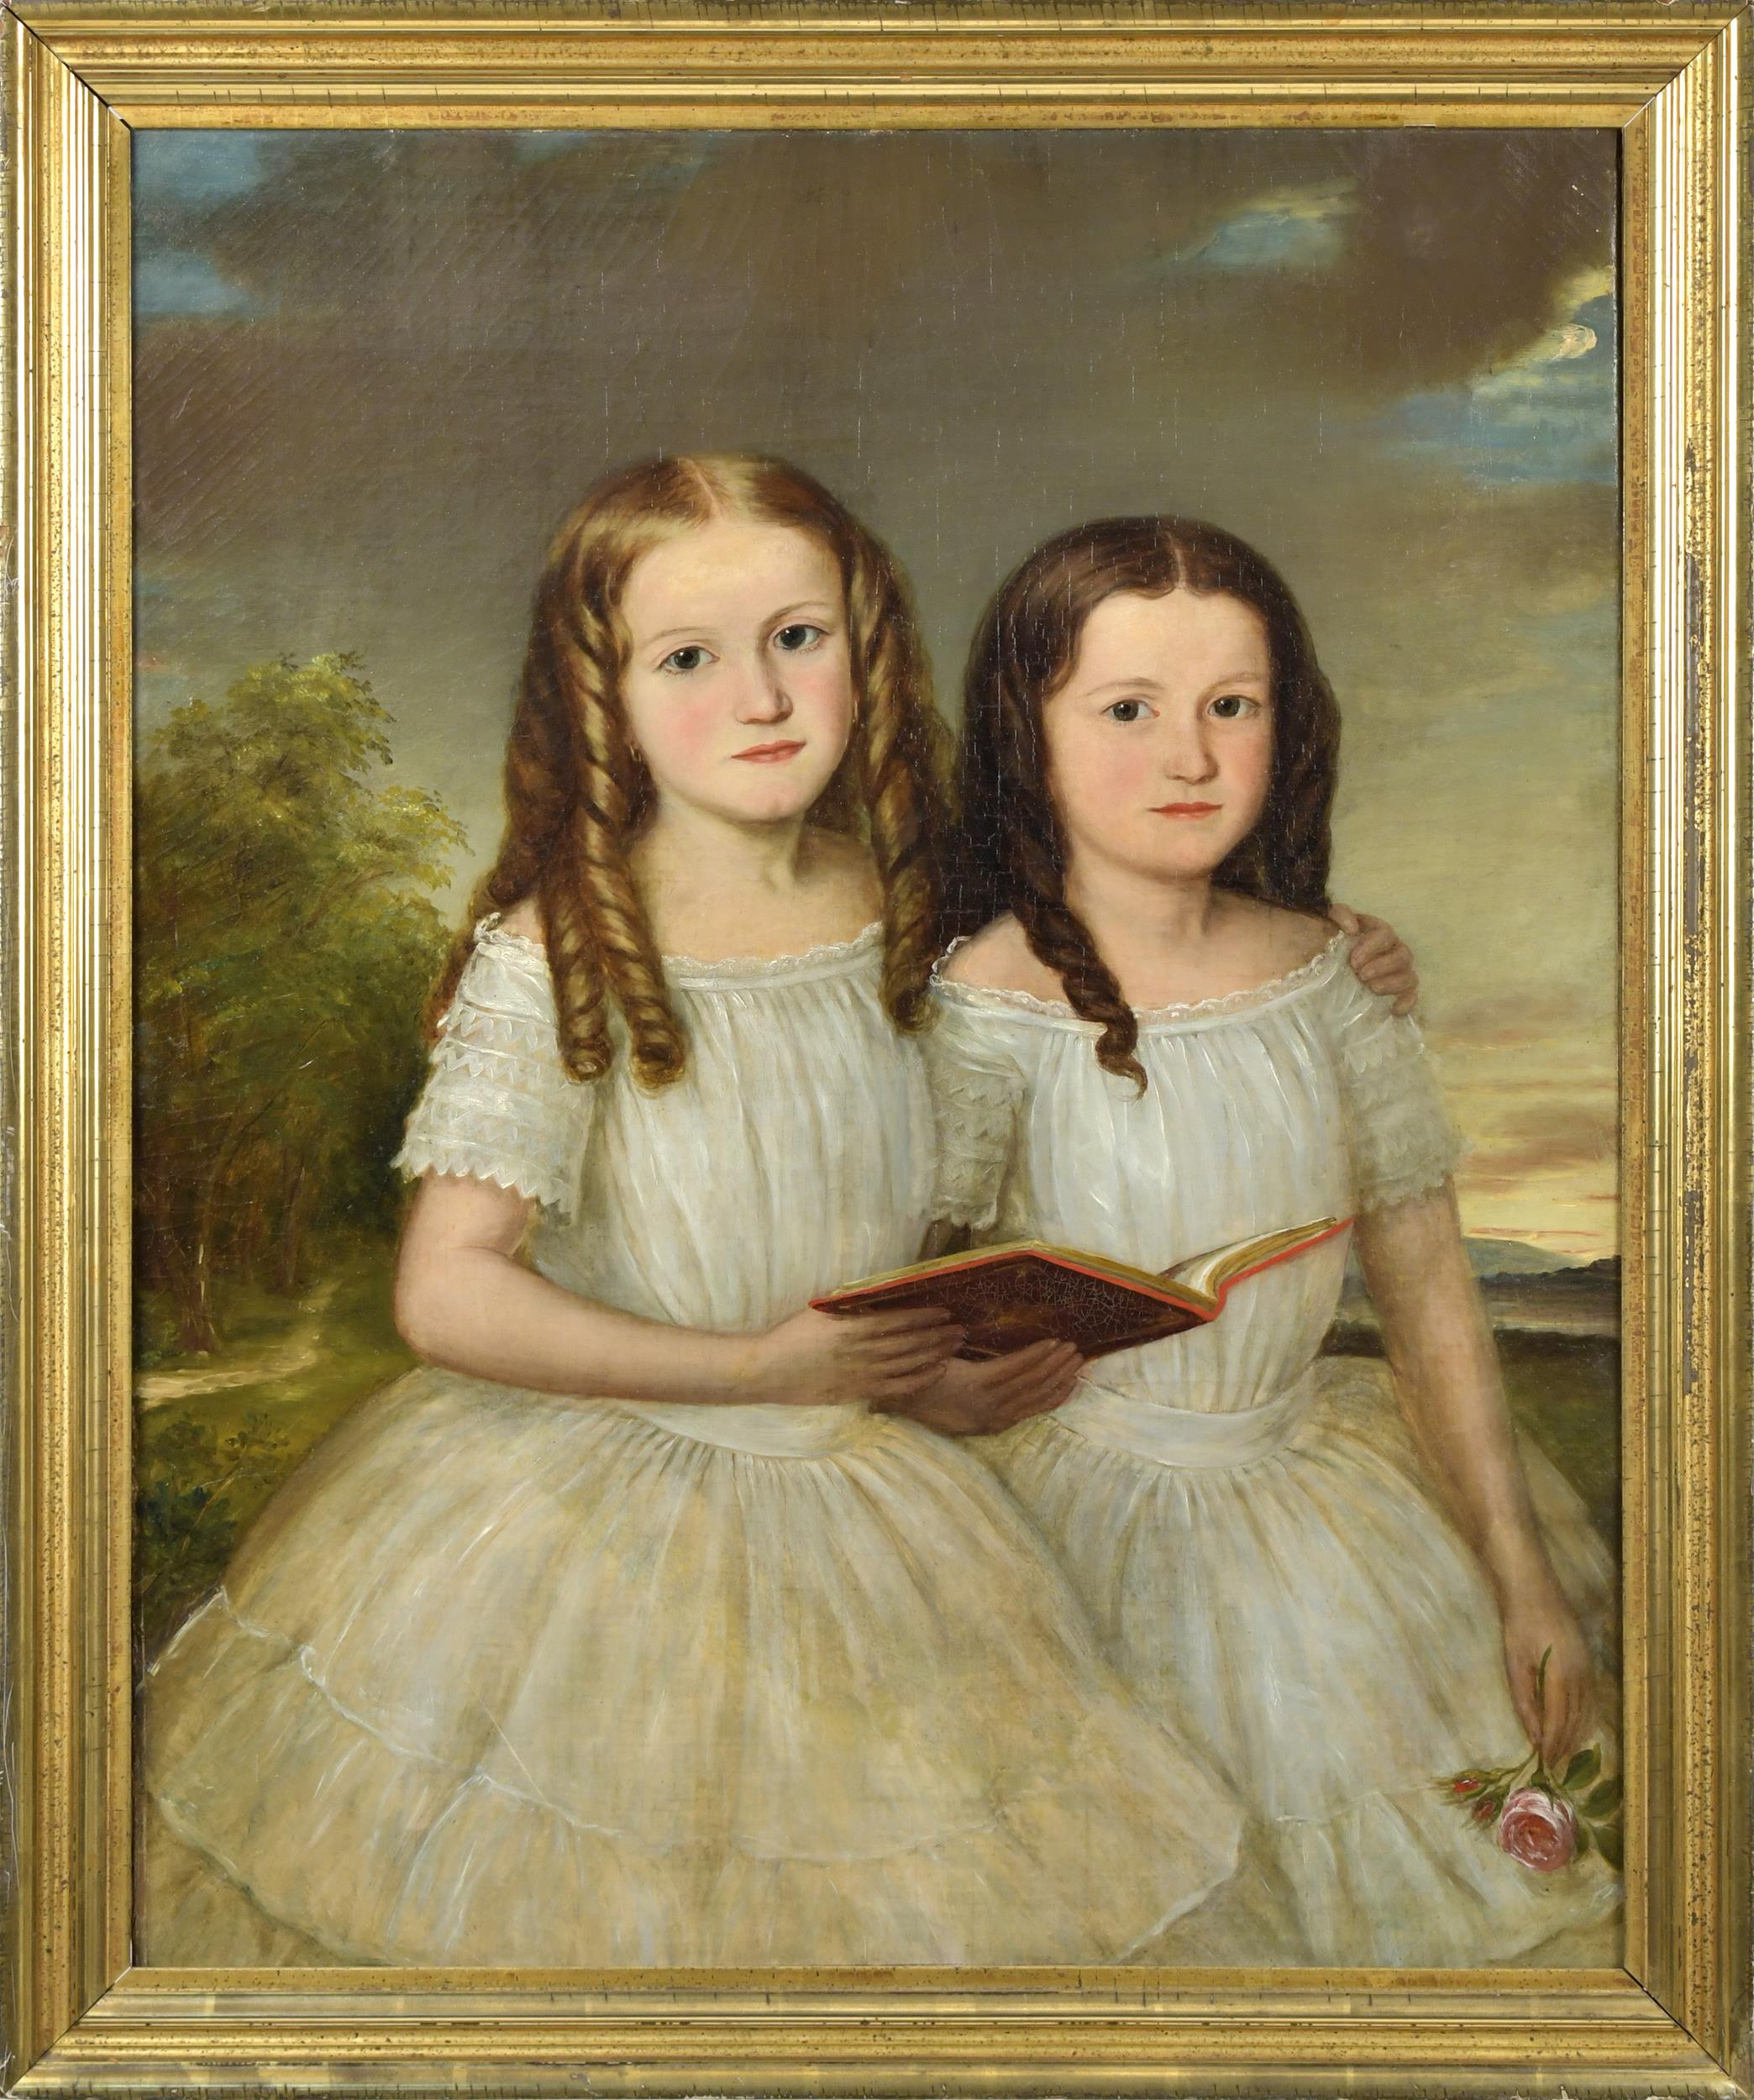 EARLY 19TH C. OIL ON CANVAS, PORTRAIT